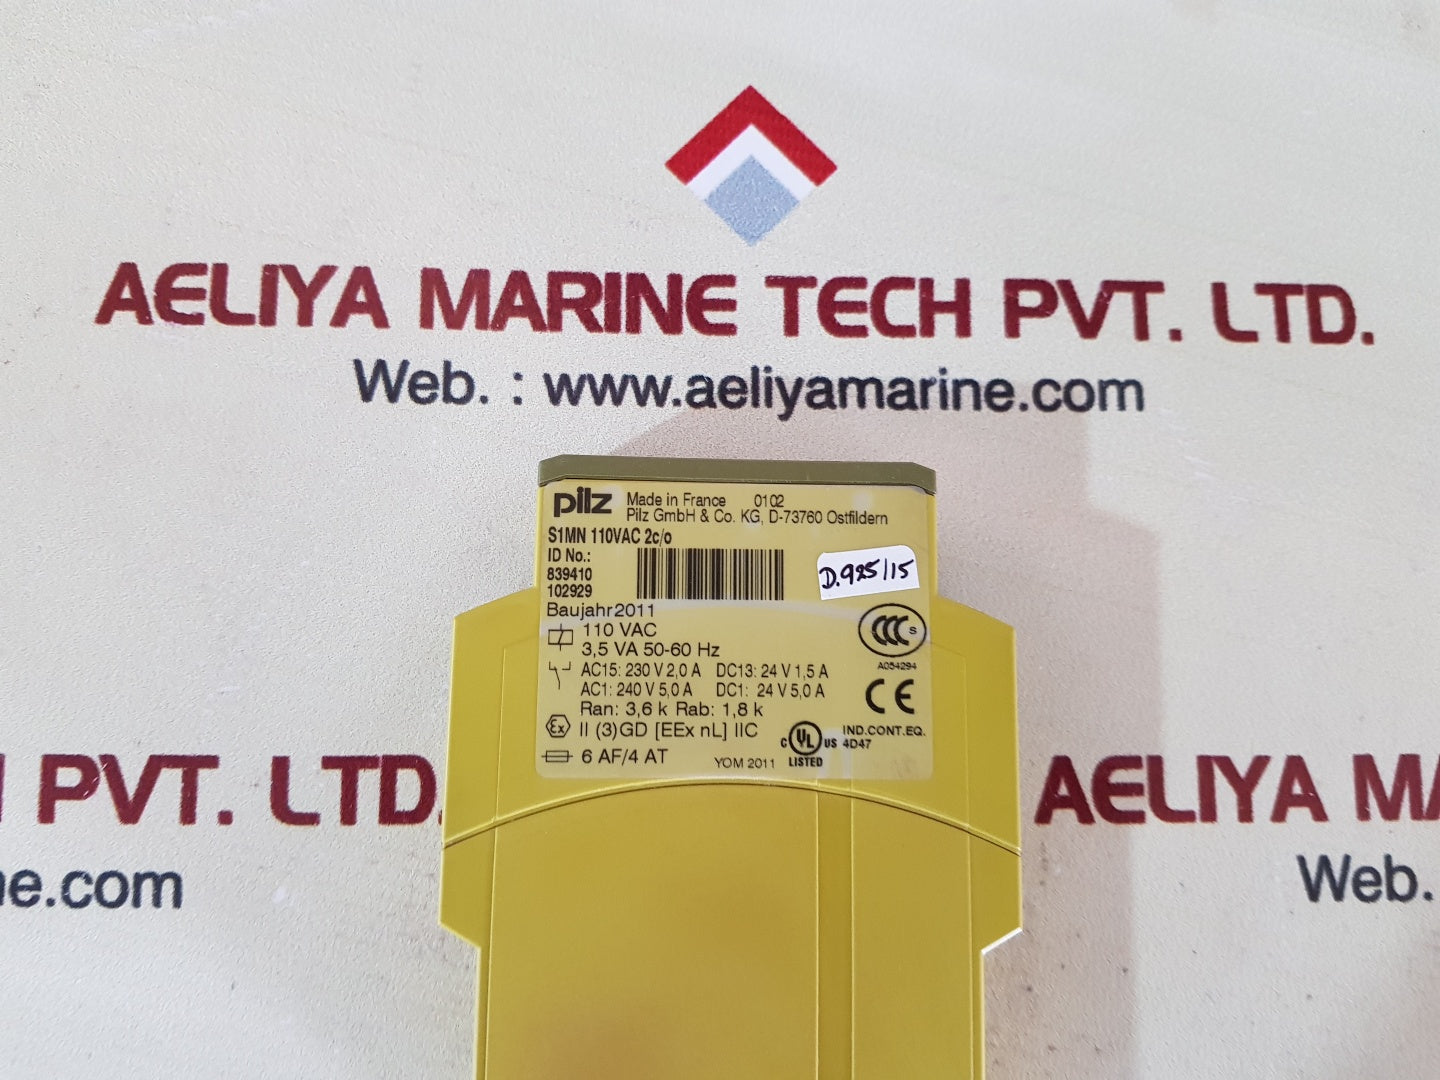 Pilz S1Mn 110Vac 2C/O Electronic Protection Relays 839410 102929